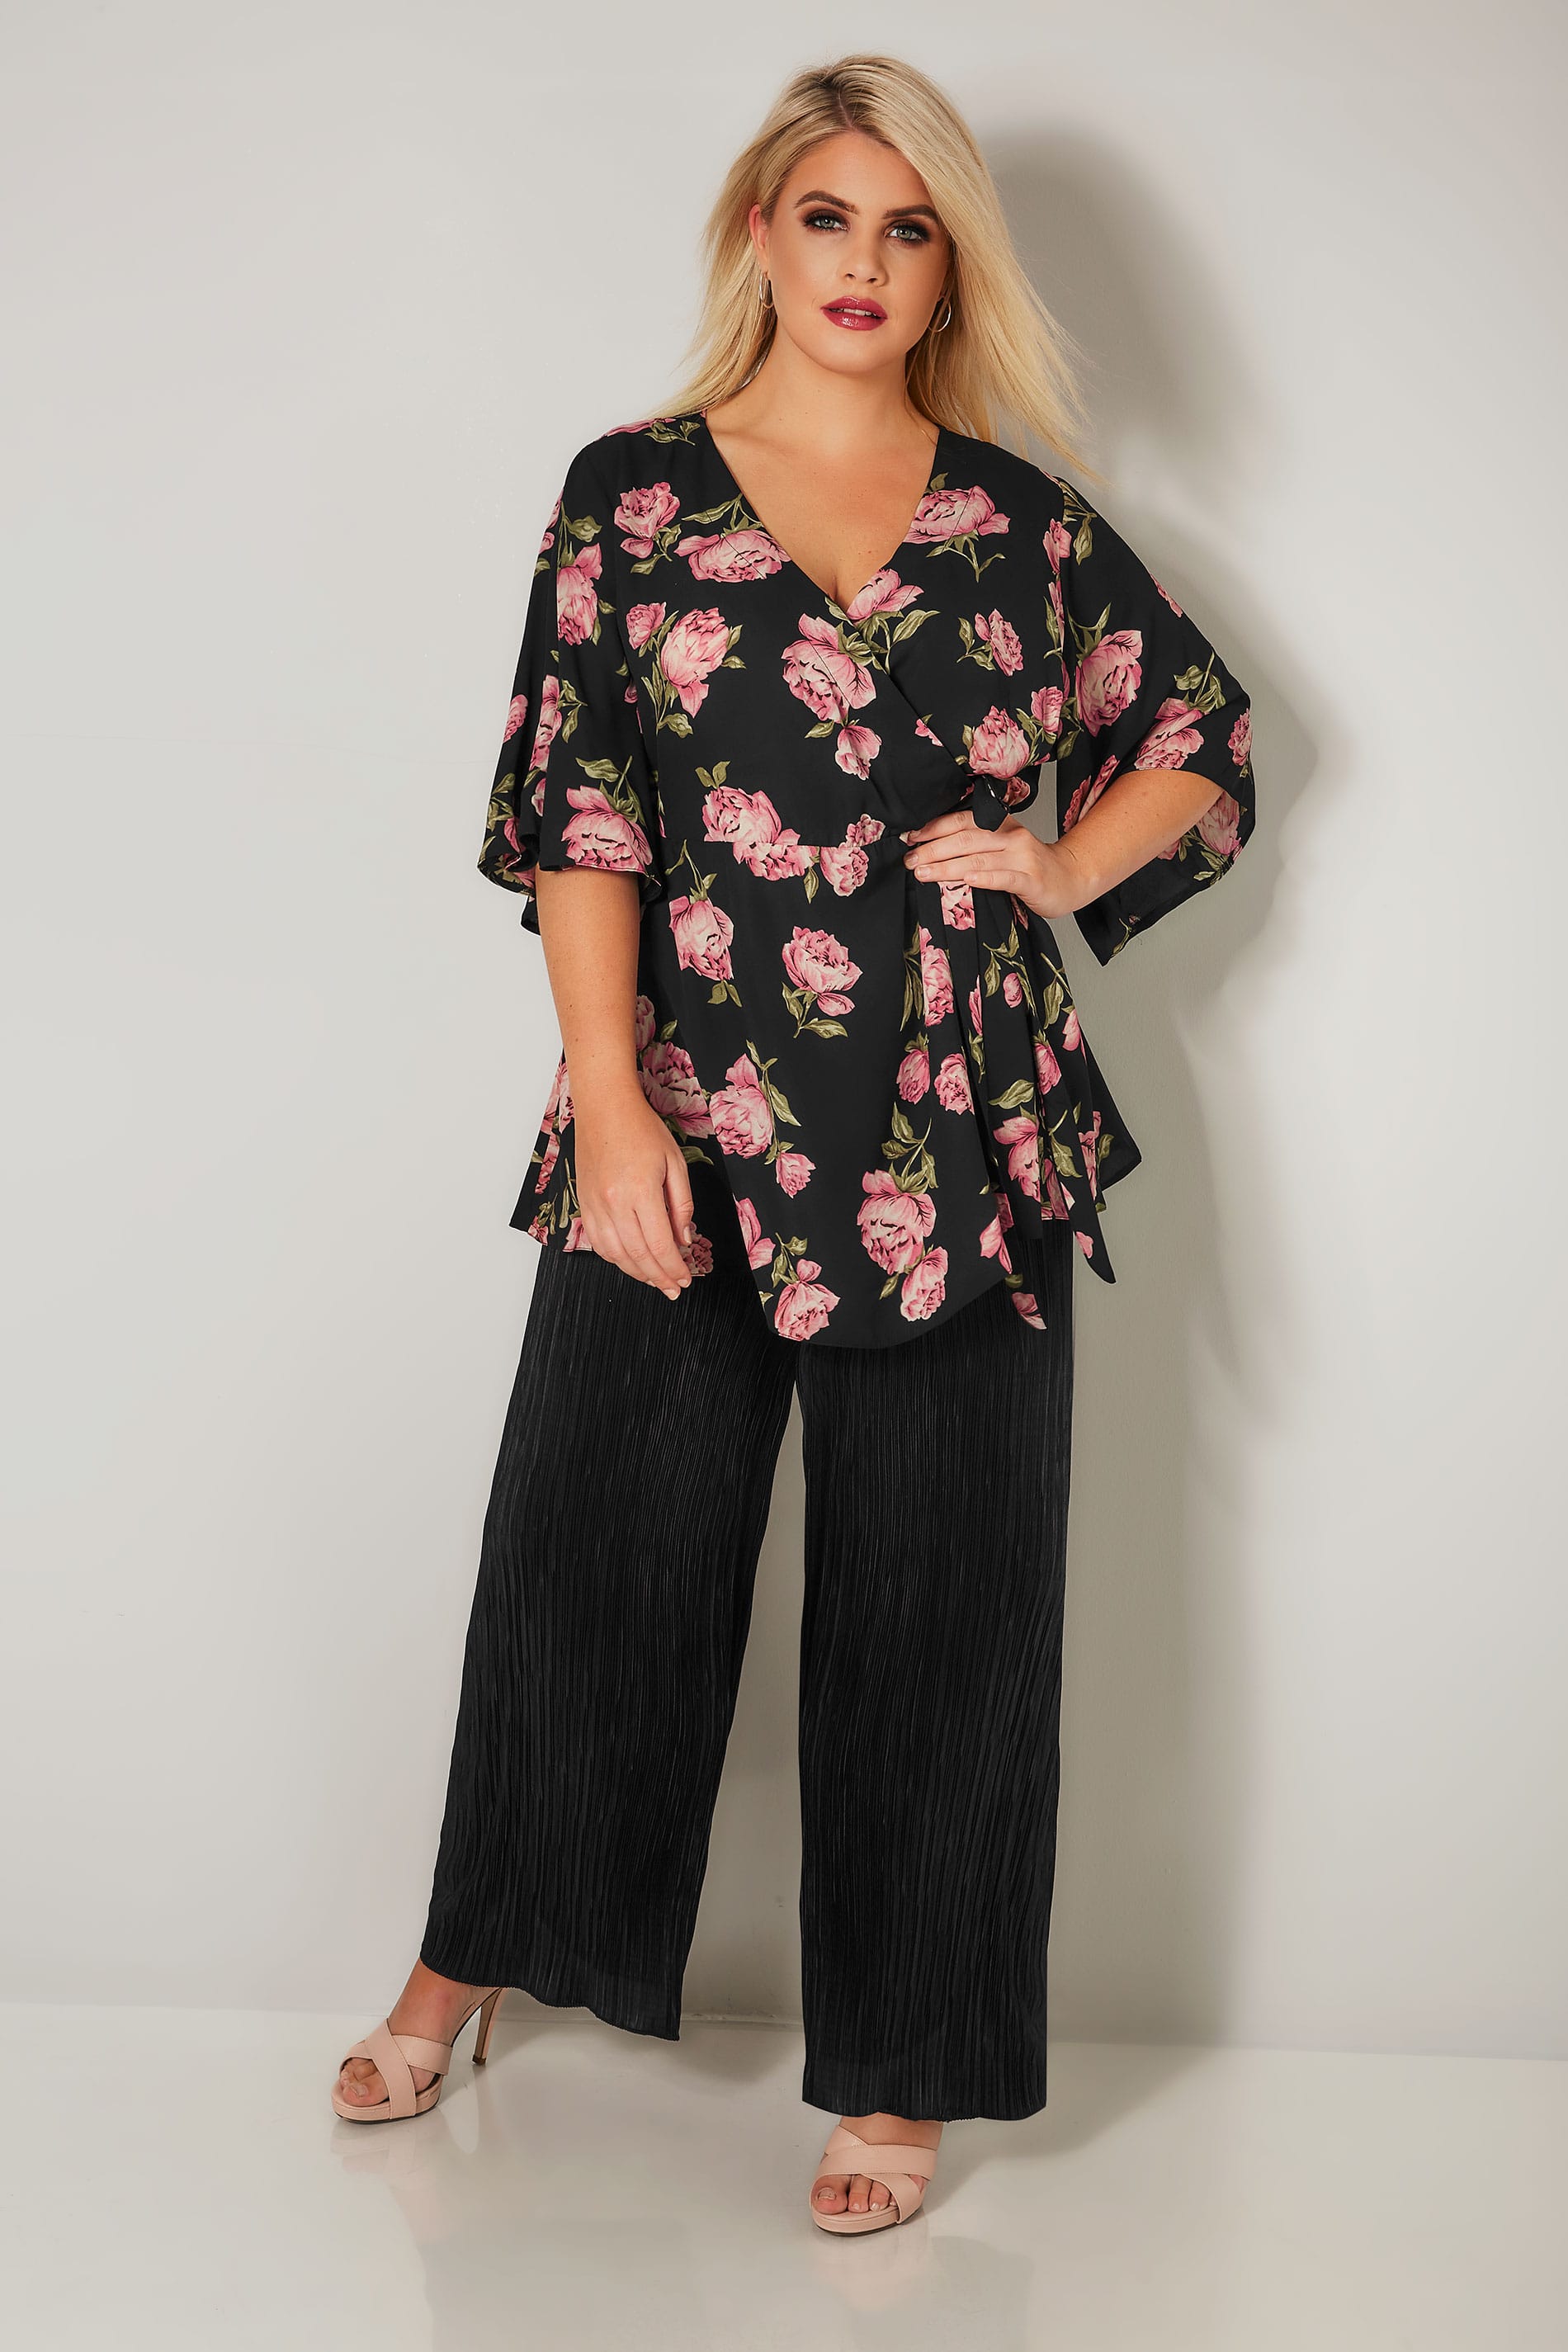 YOURS LONDON Black & Pink Peony Print Wrap Blouse With Kimono Sleeves ...